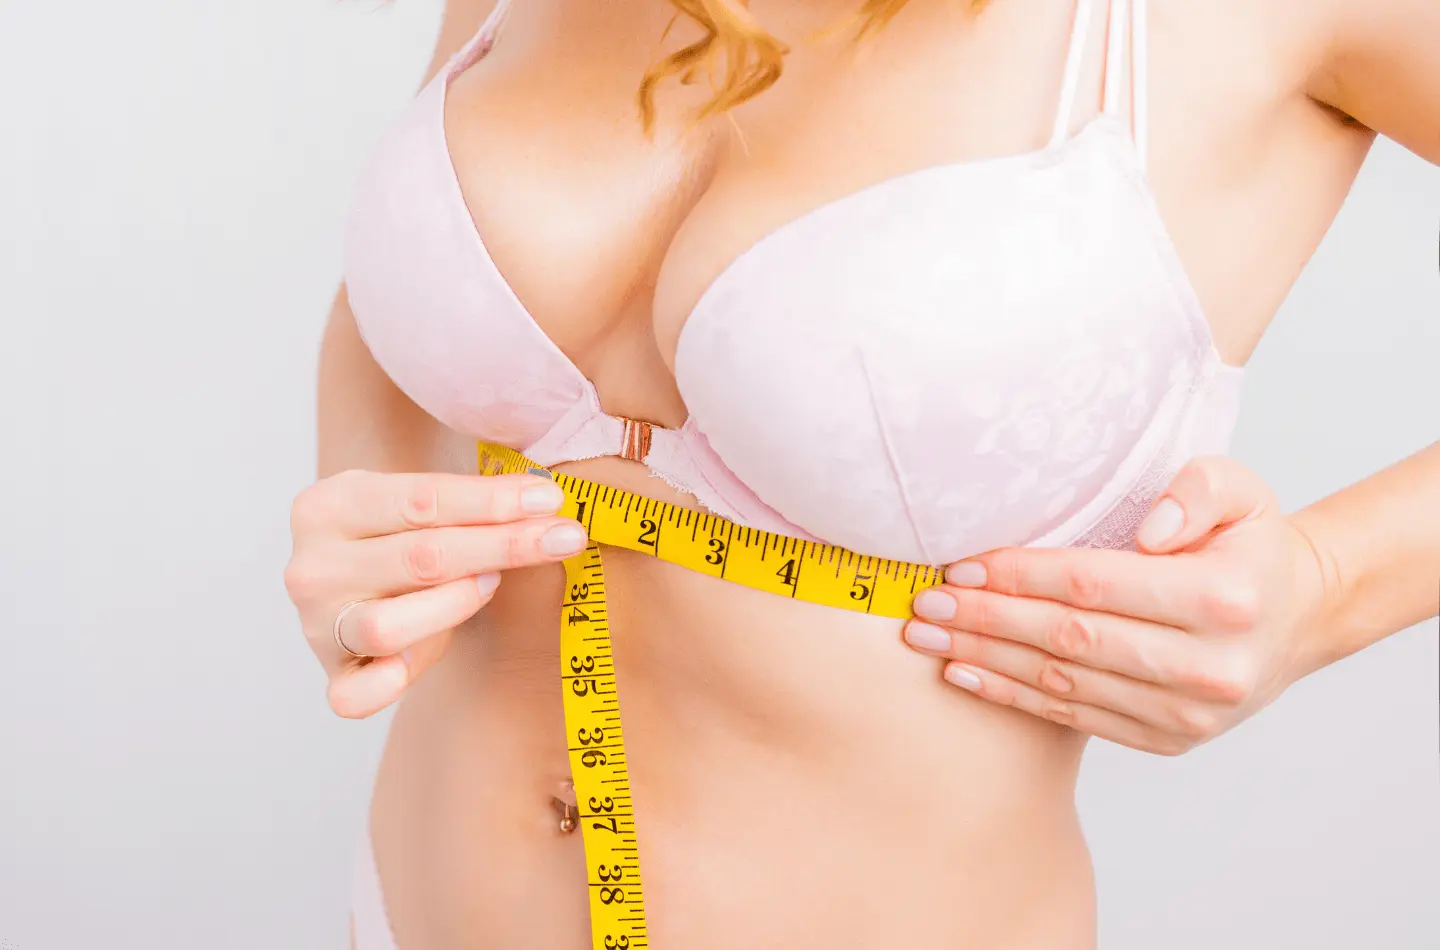 Right Bra Size - 7 Reasons for Wearing The Right Bra